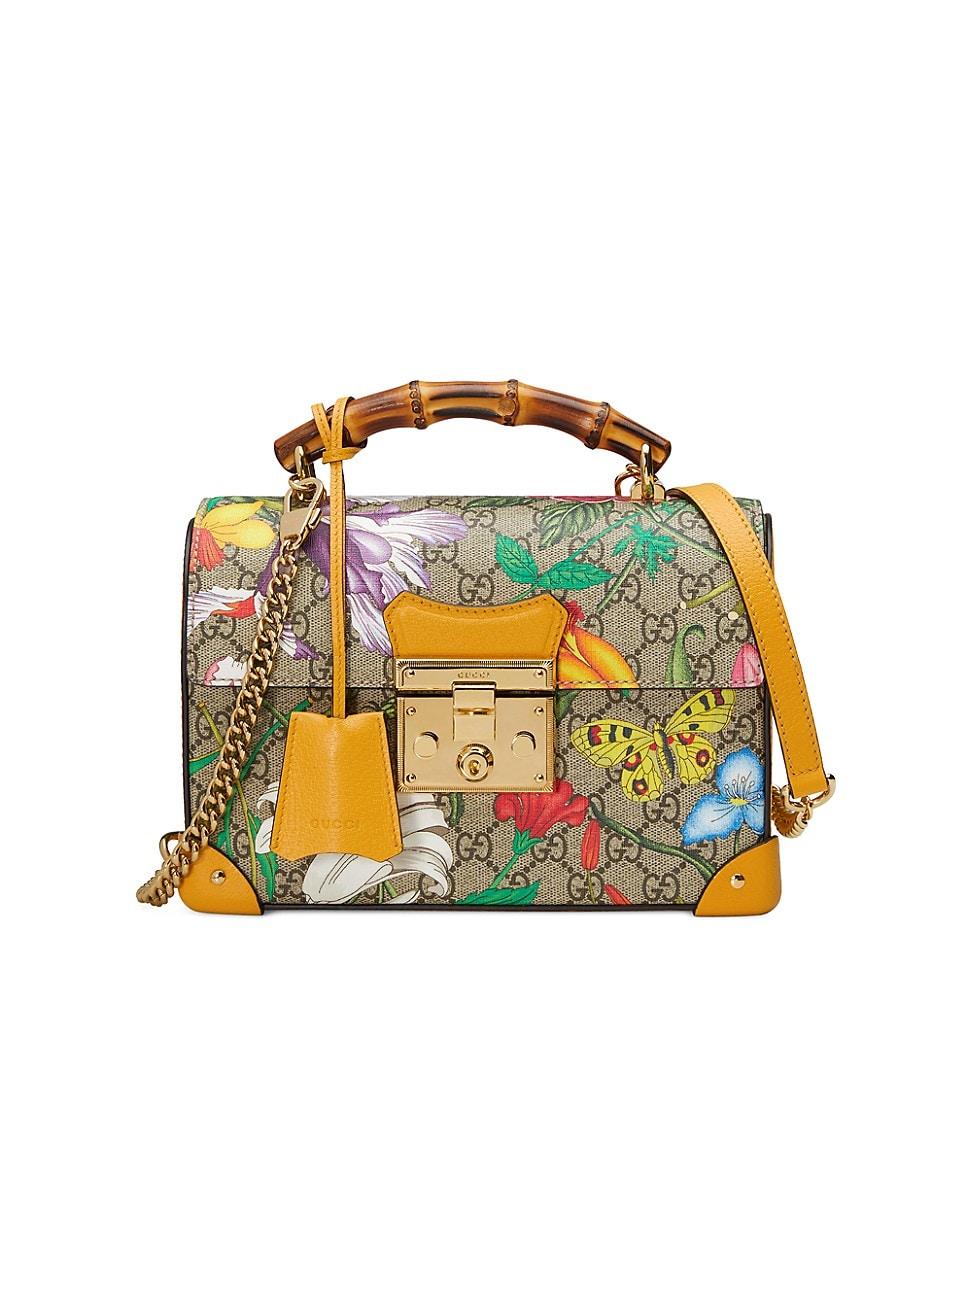 Gucci Flora Gg Supreme Top Handle Bamboo Bag | Lyst